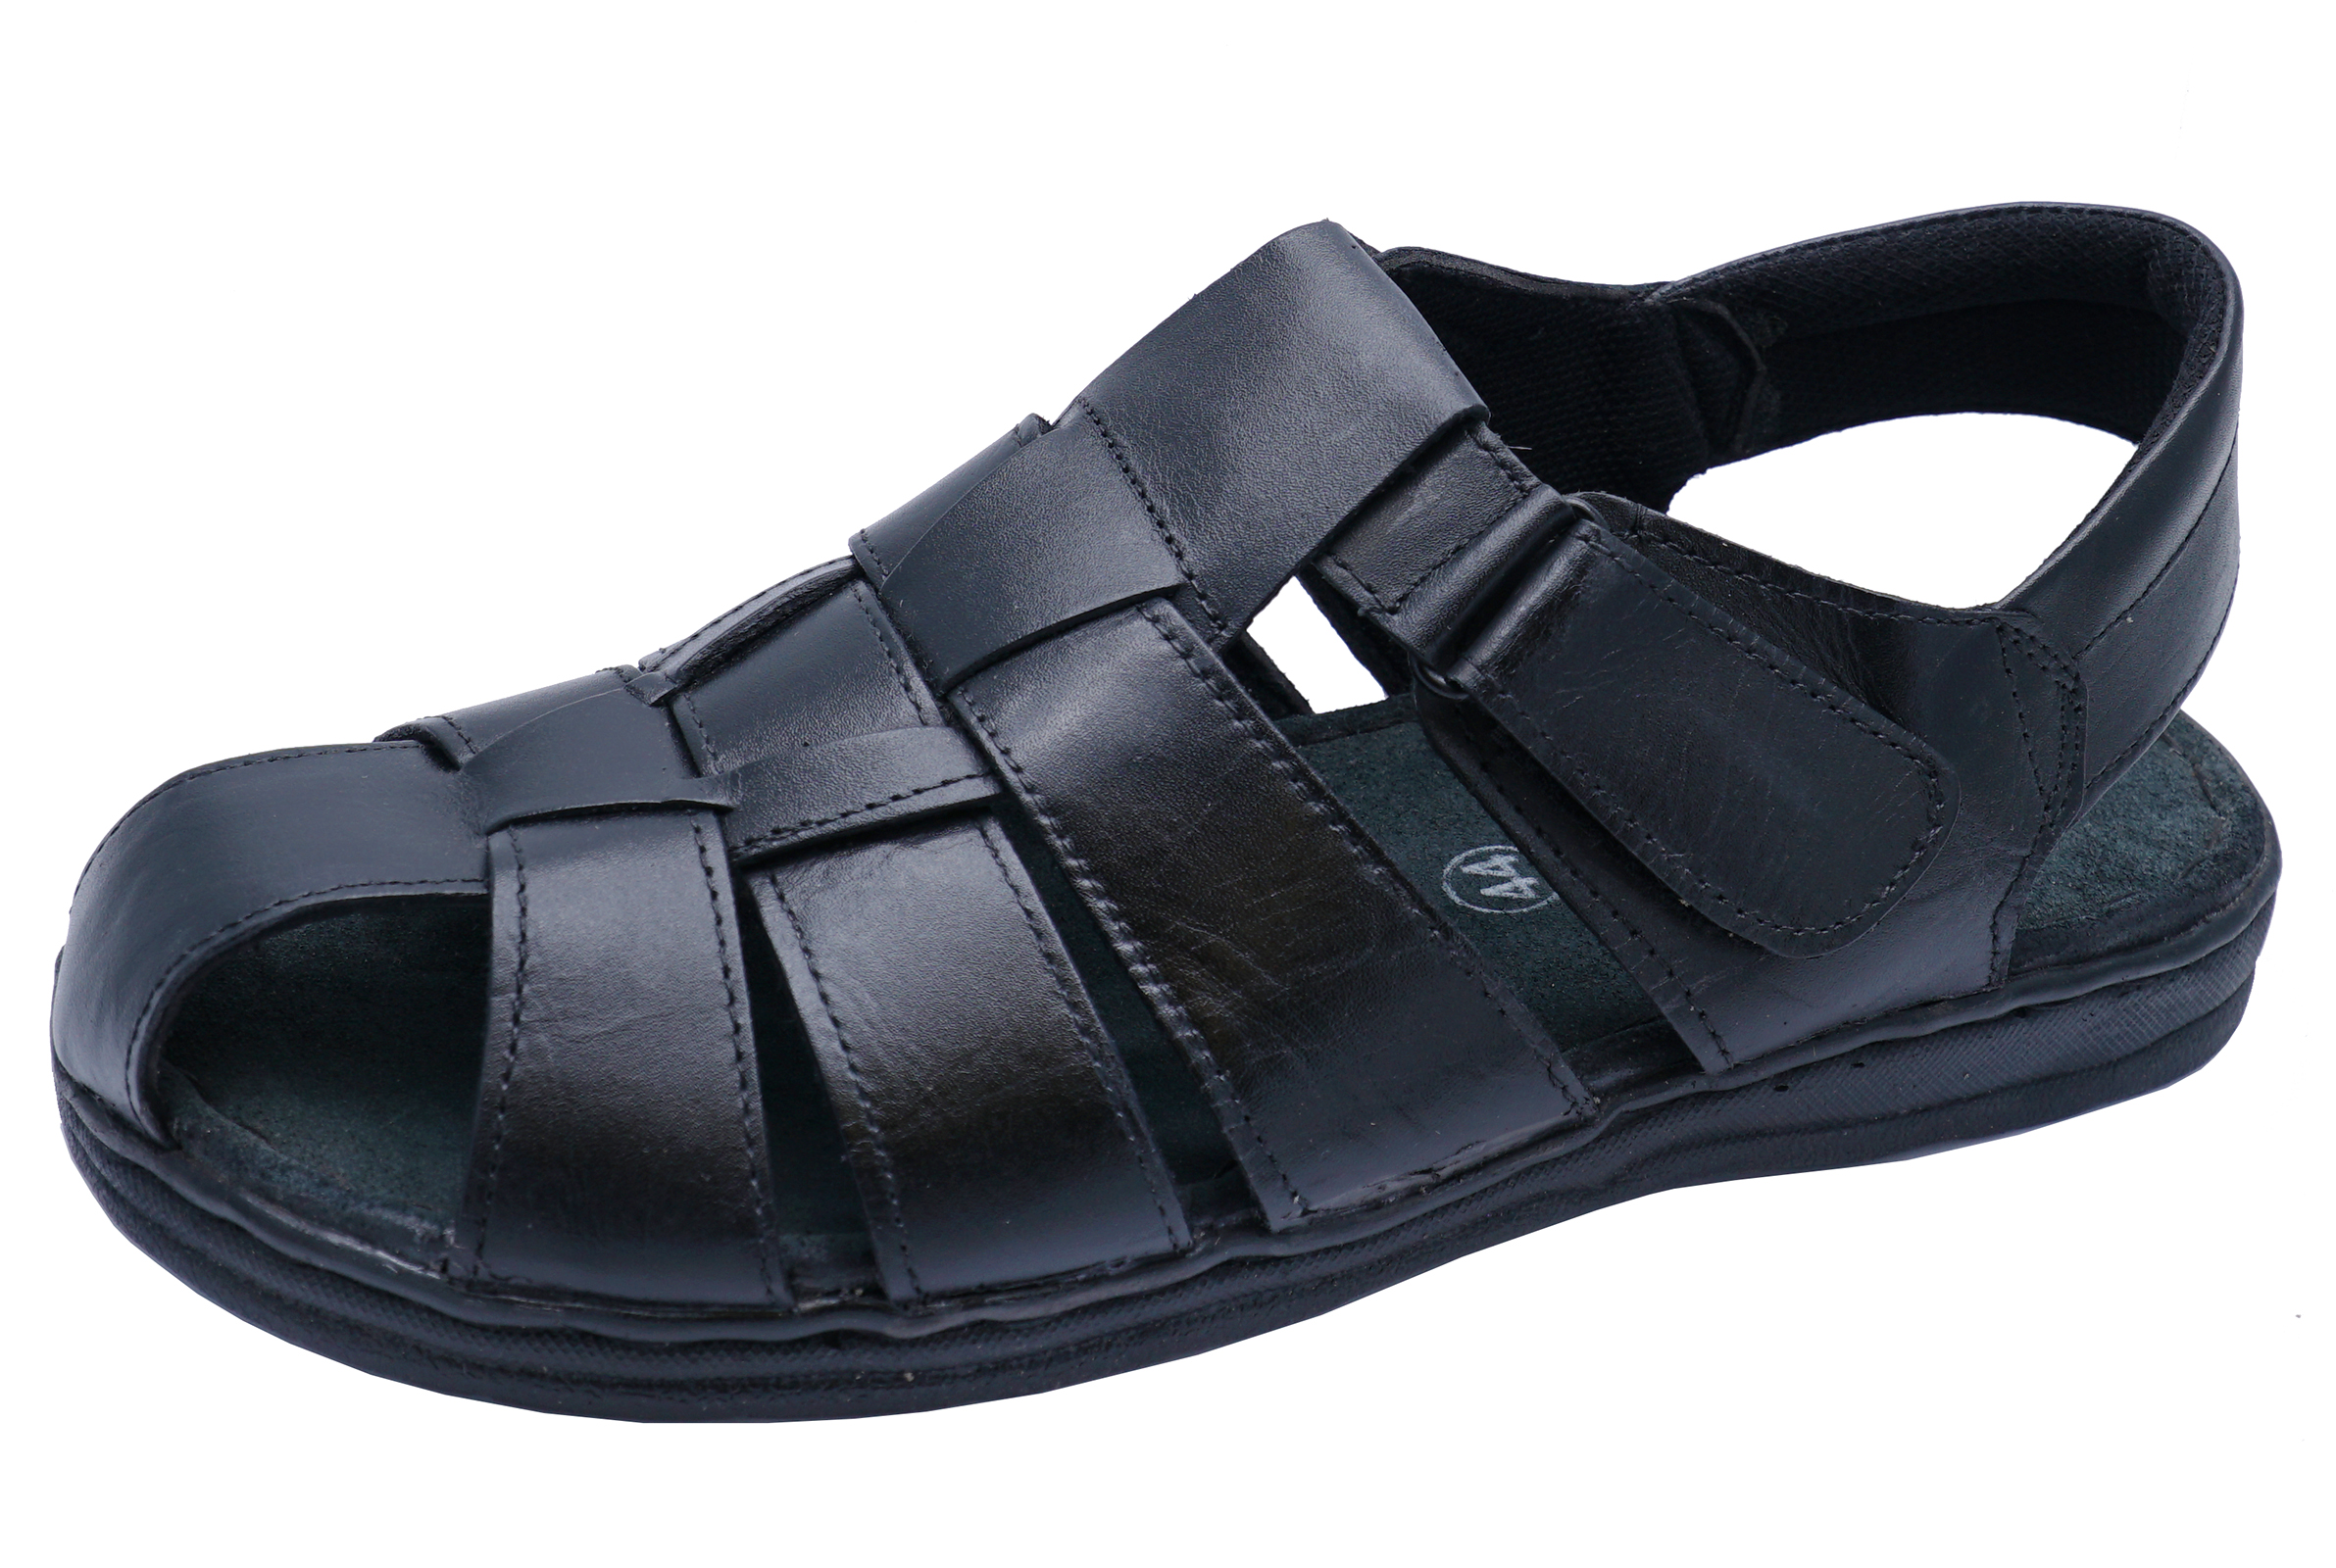 MENS BLACK LEATHER FLAT WALKING SUMMER SANDALS TRAIL CASUAL SHOES SIZES ...